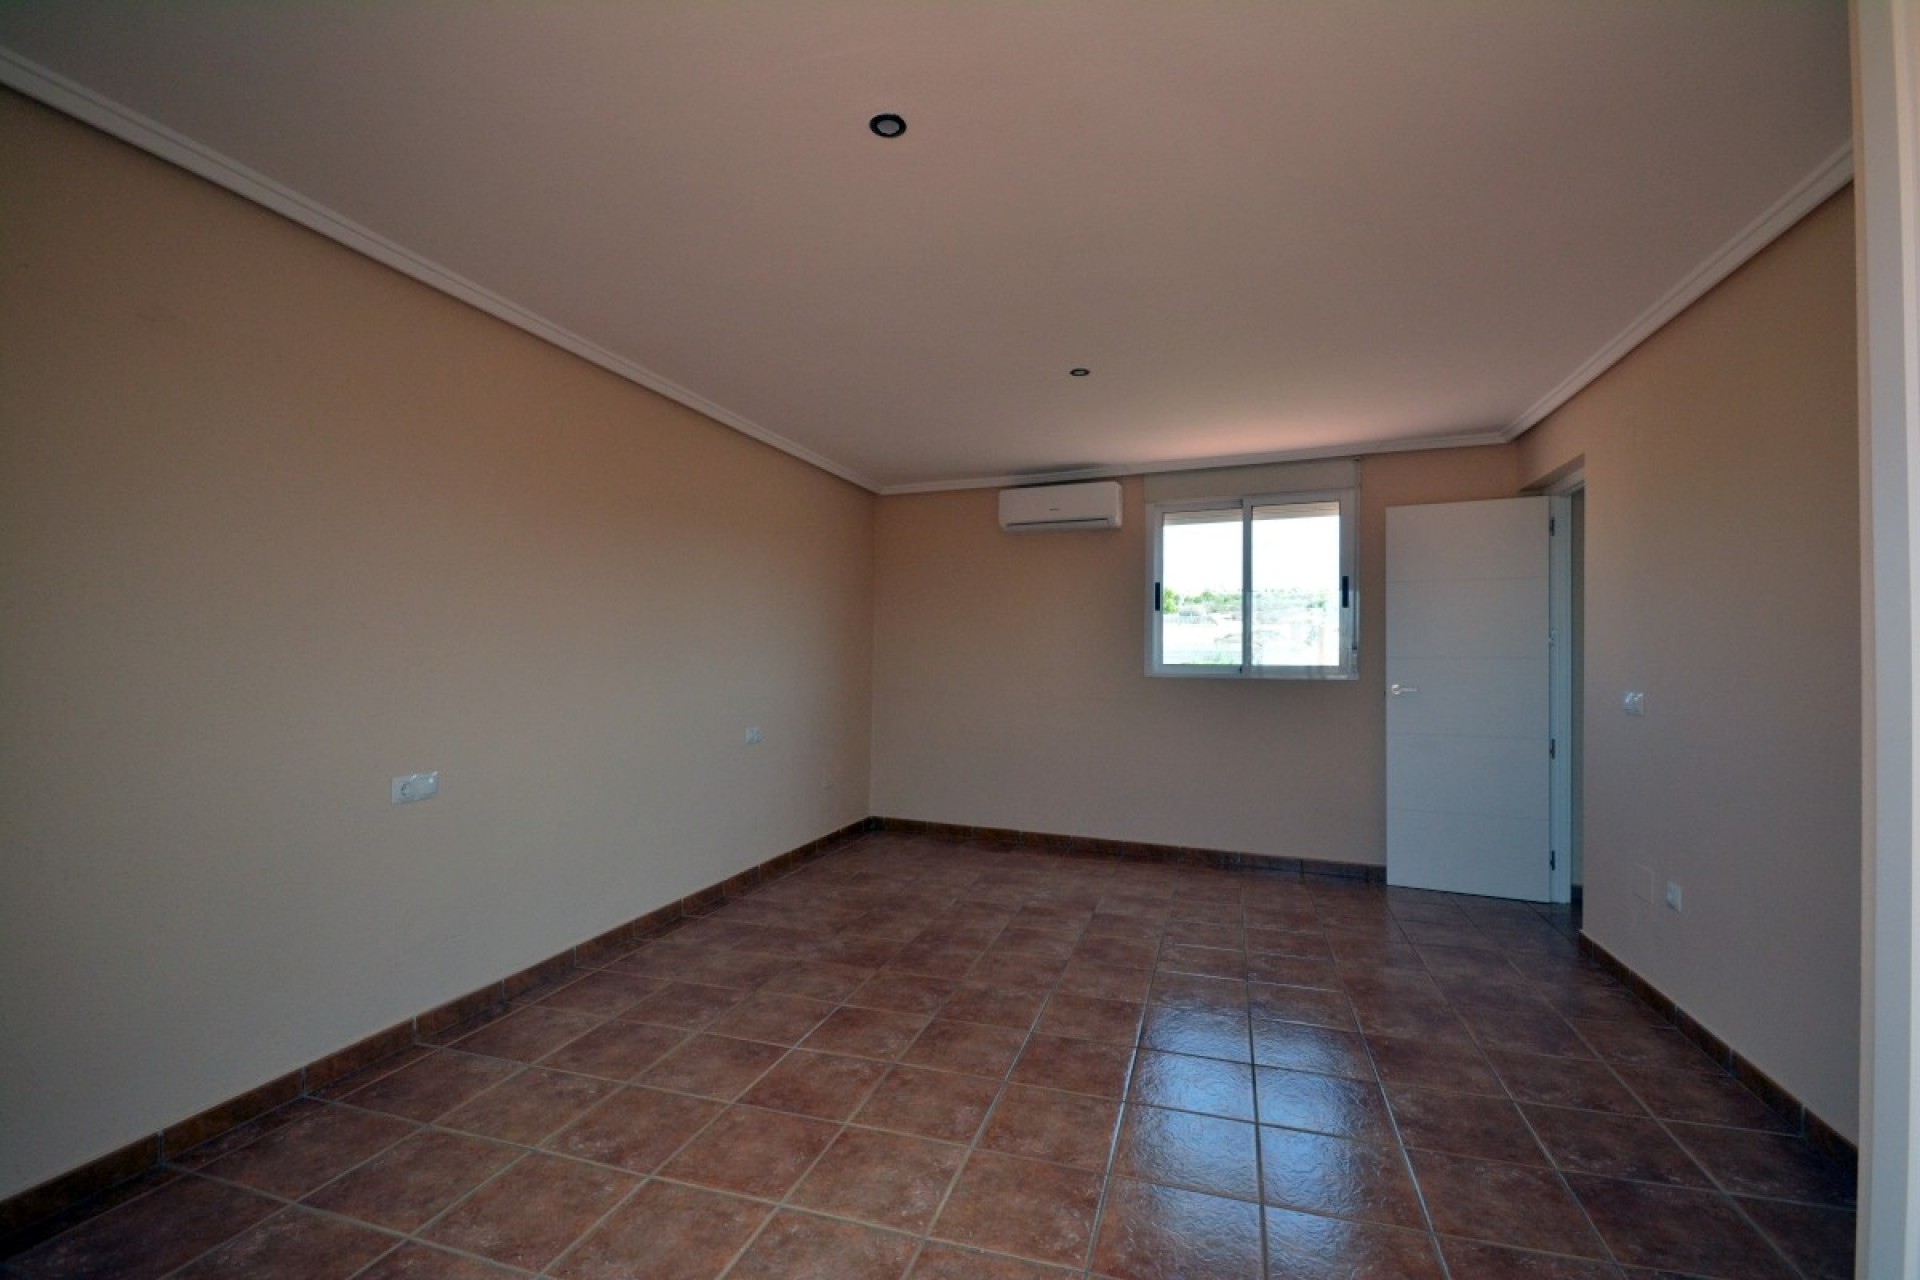 Reventa - Town House -
Rojales - Inland